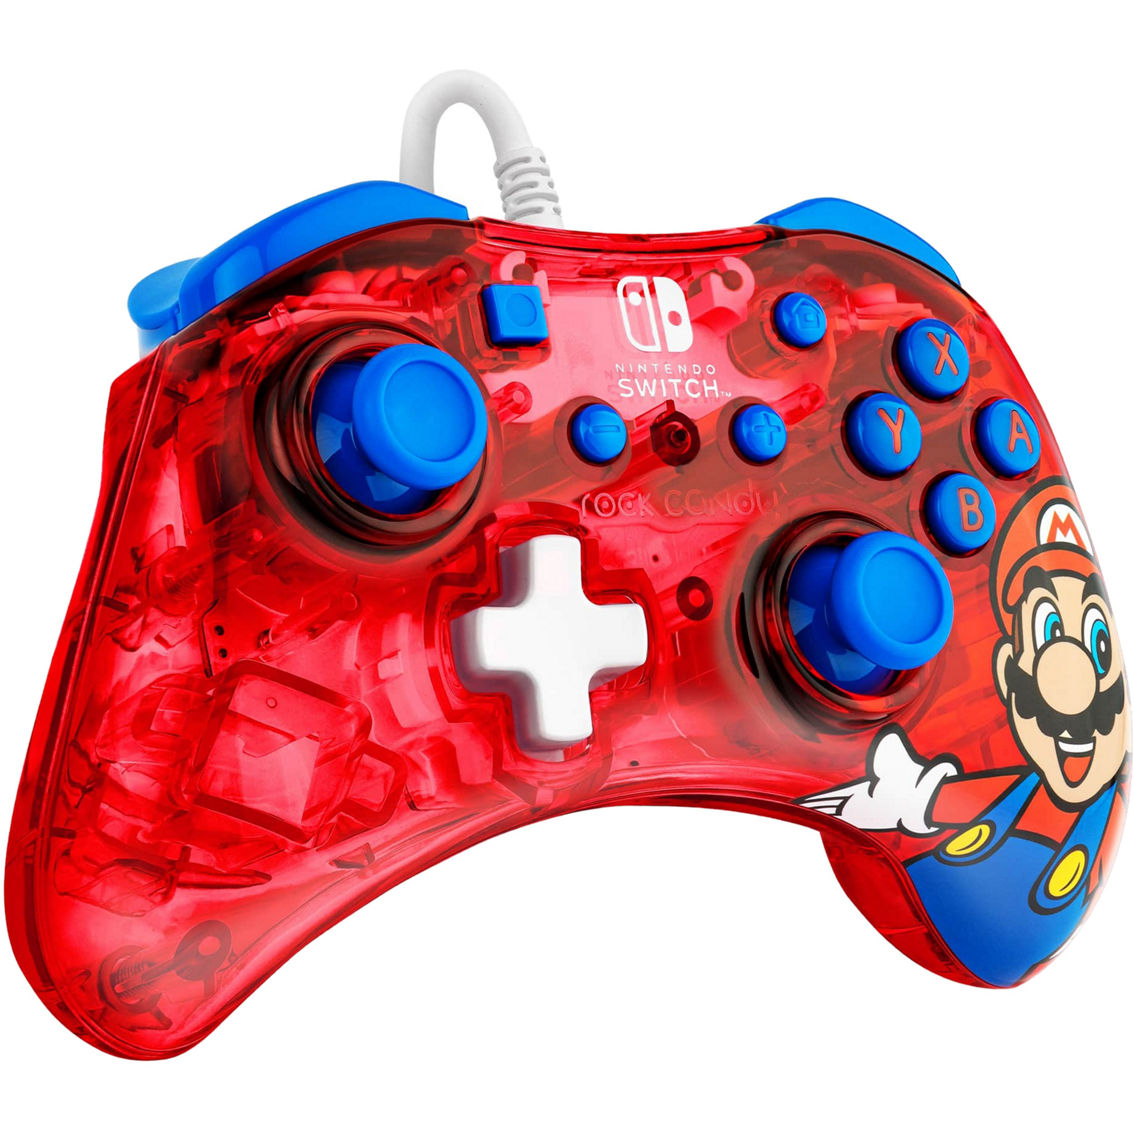 PDP Rock Candy Wired Controller: Mario Punch For Nintendo Switch - Image 4 of 9